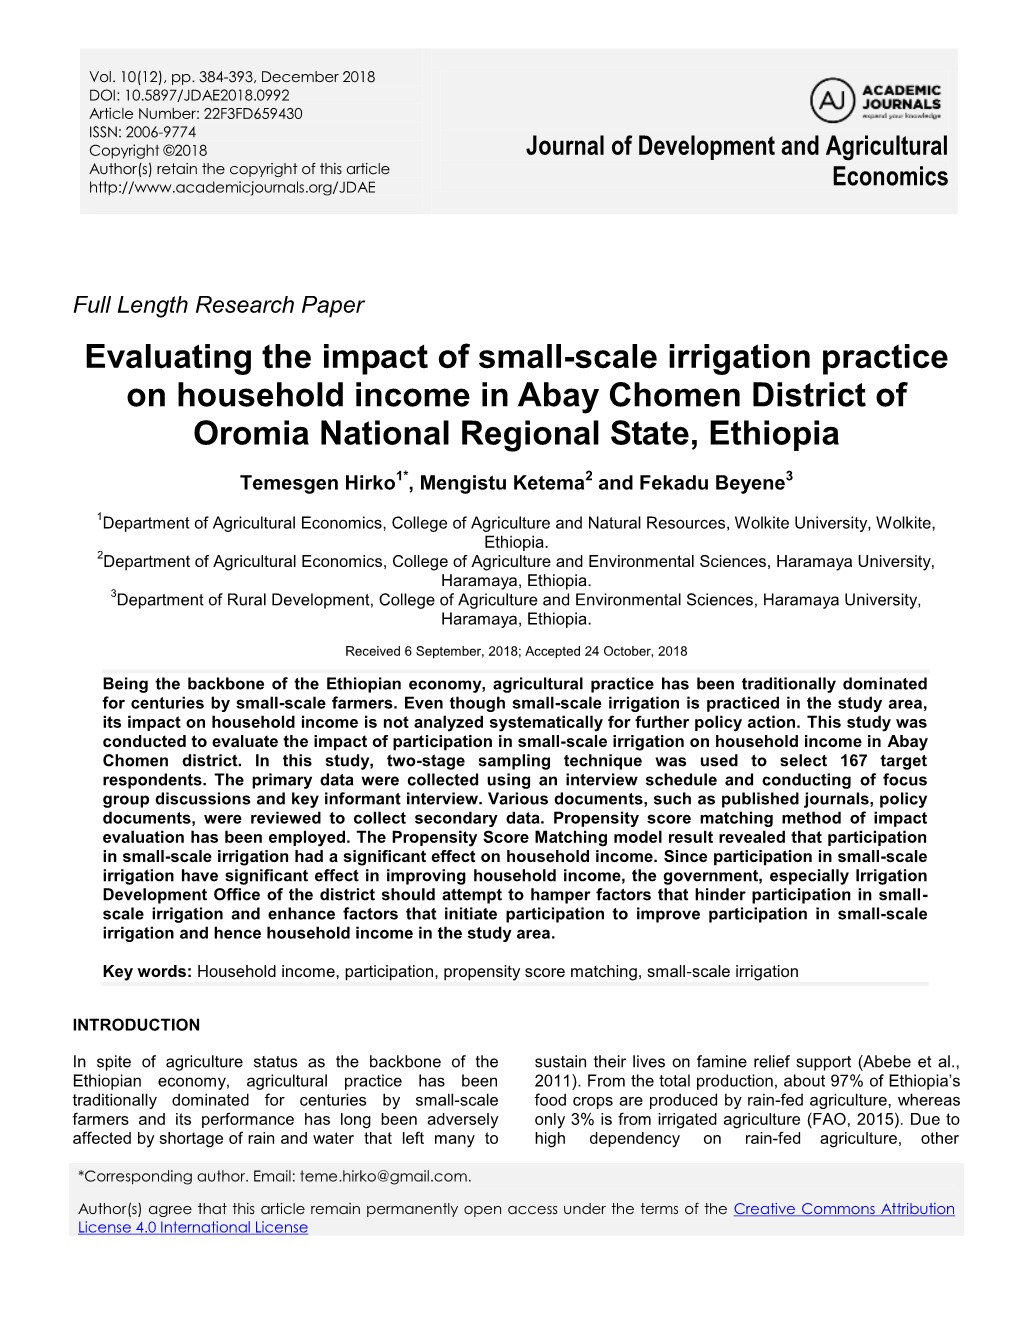 Evaluating the Impact of Small-Scale Irrigation Practice on Household Income in Abay Chomen District of Oromia National Regional State, Ethiopia